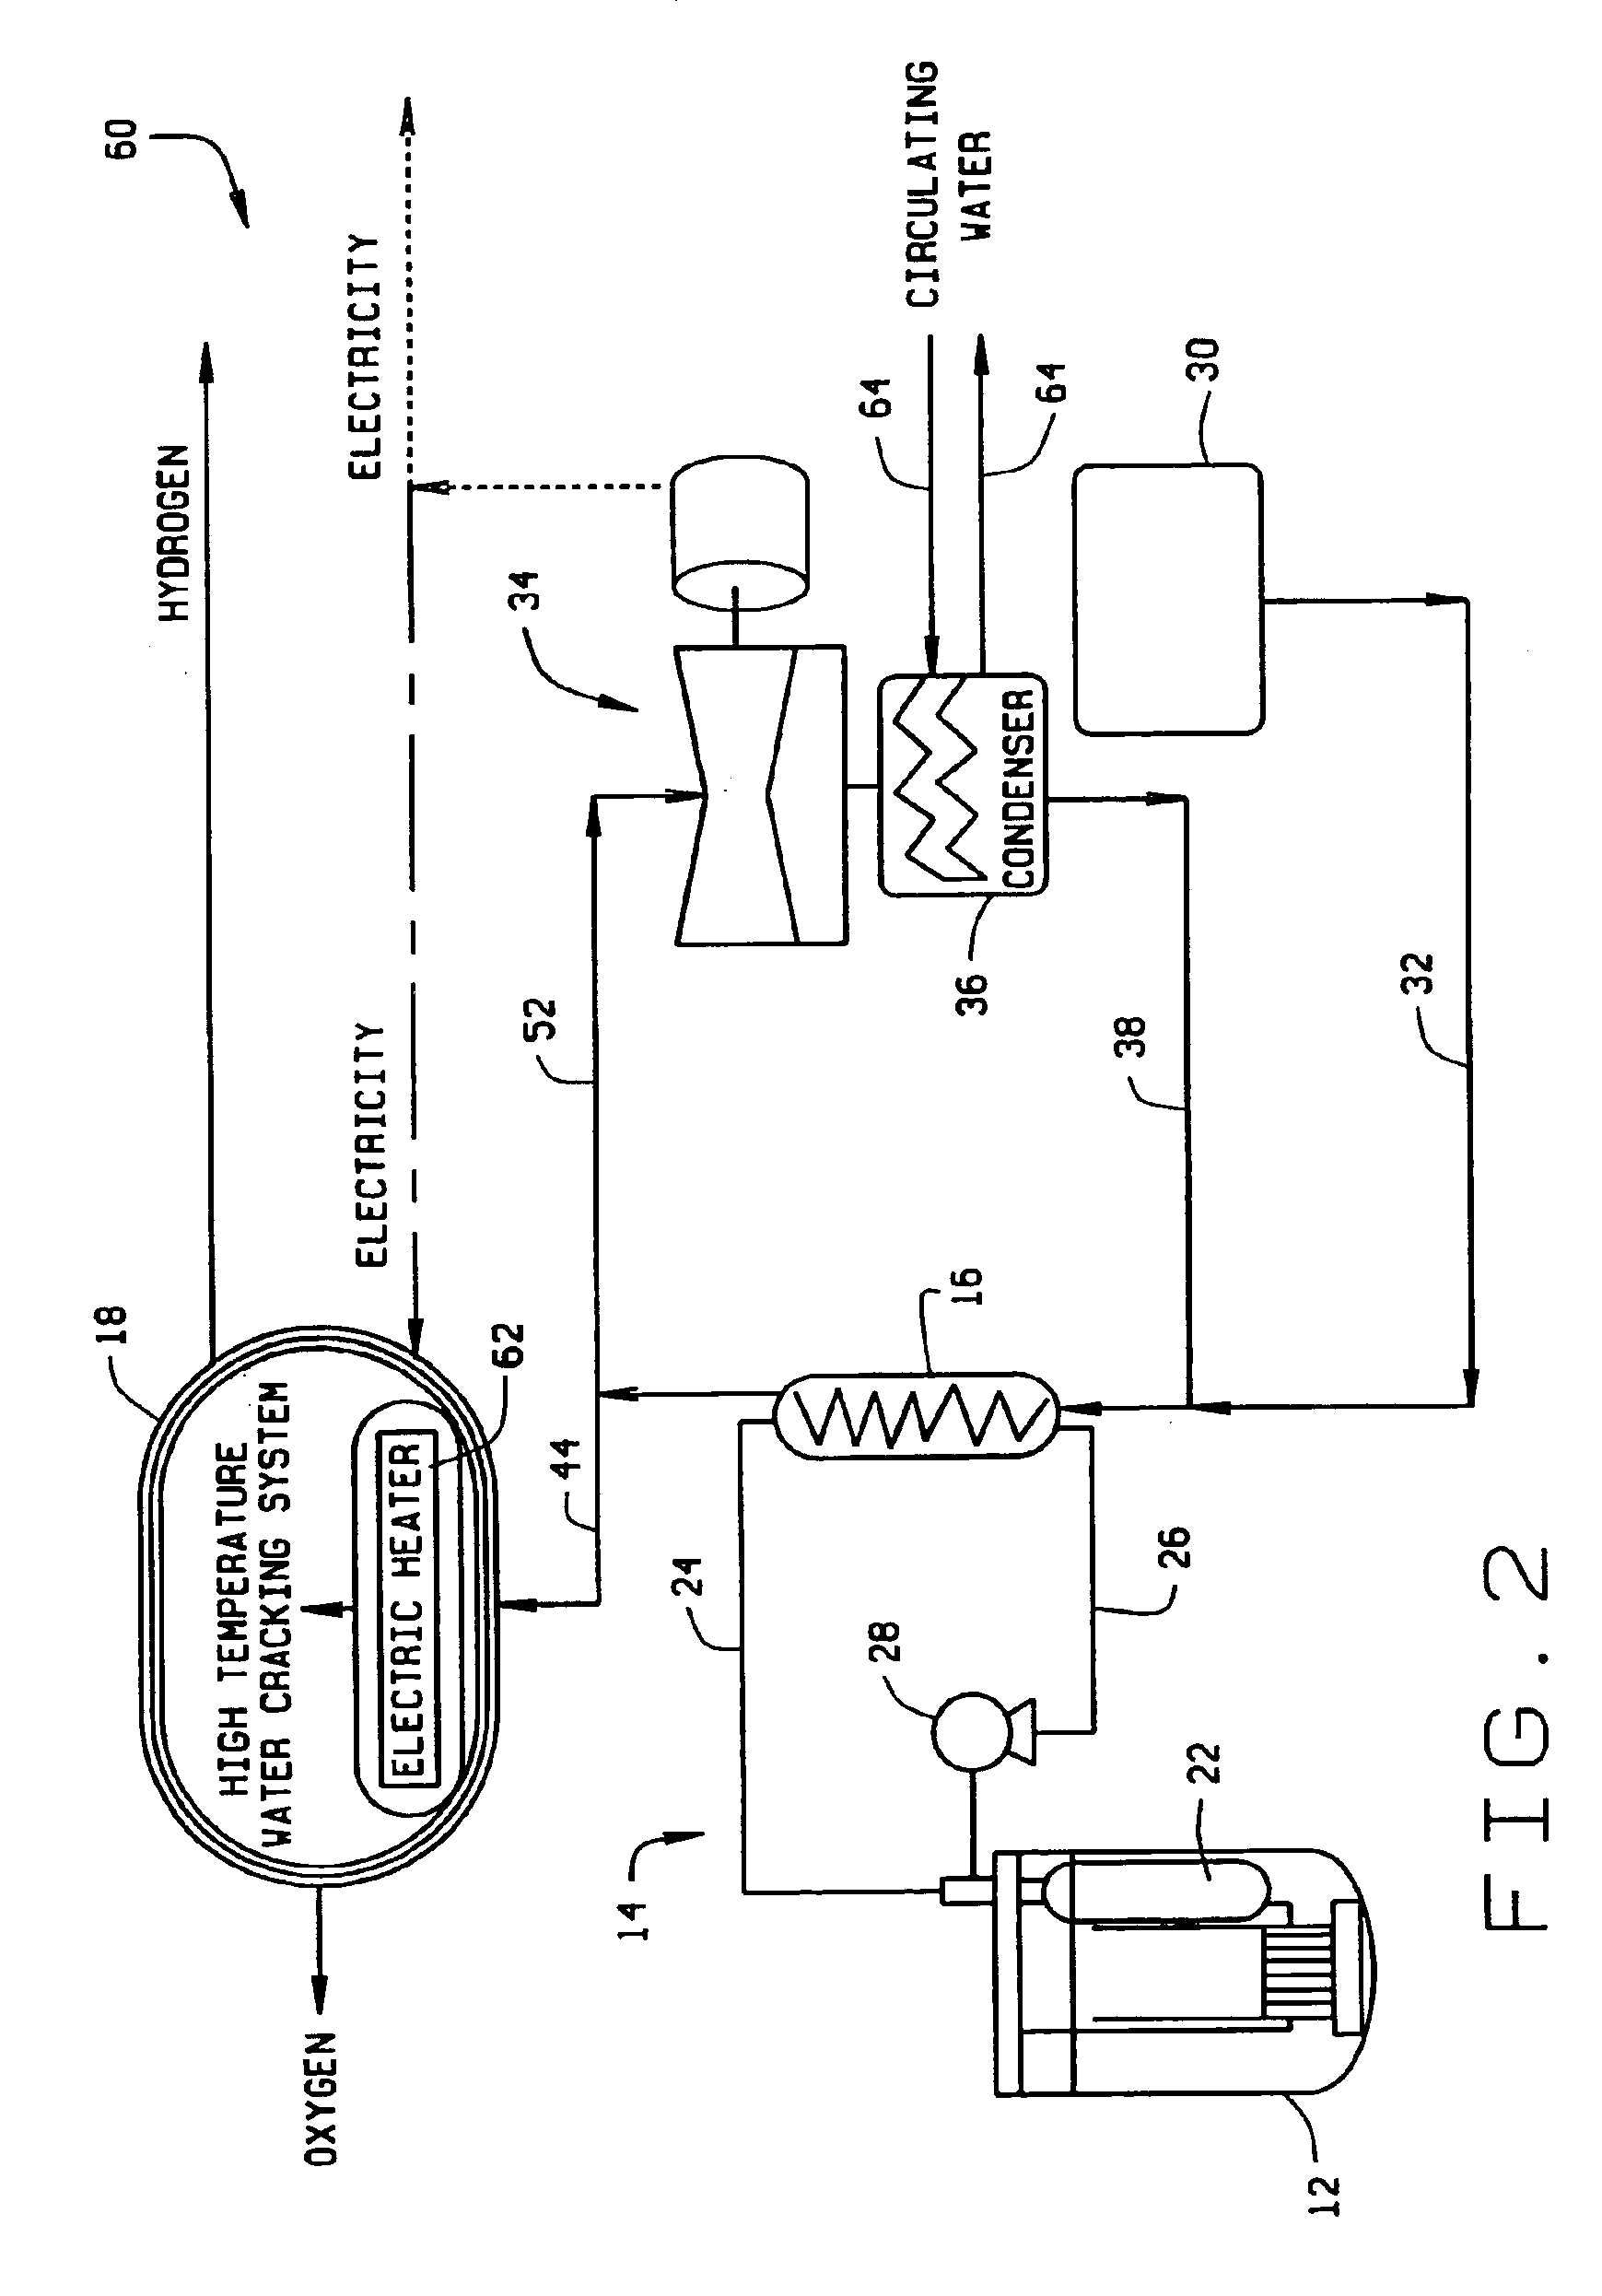 Systems and methods of producing hydrogen using a nuclear reactor